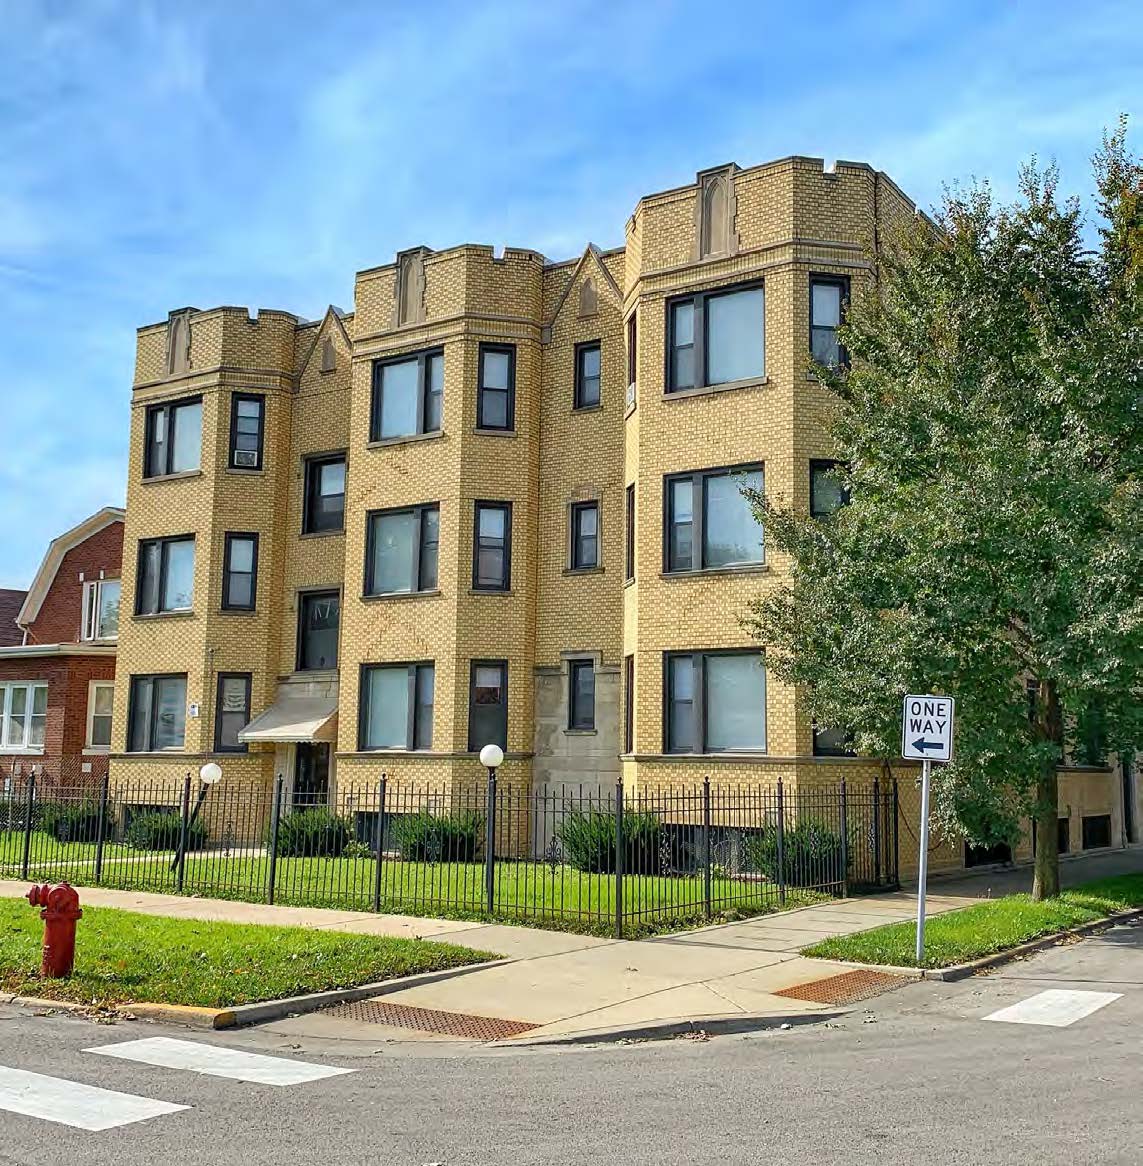 Photo of 7600 S. Honore located in Chicago's Auburn Gresham. Listed by Aaron Sklar and Noah Birk